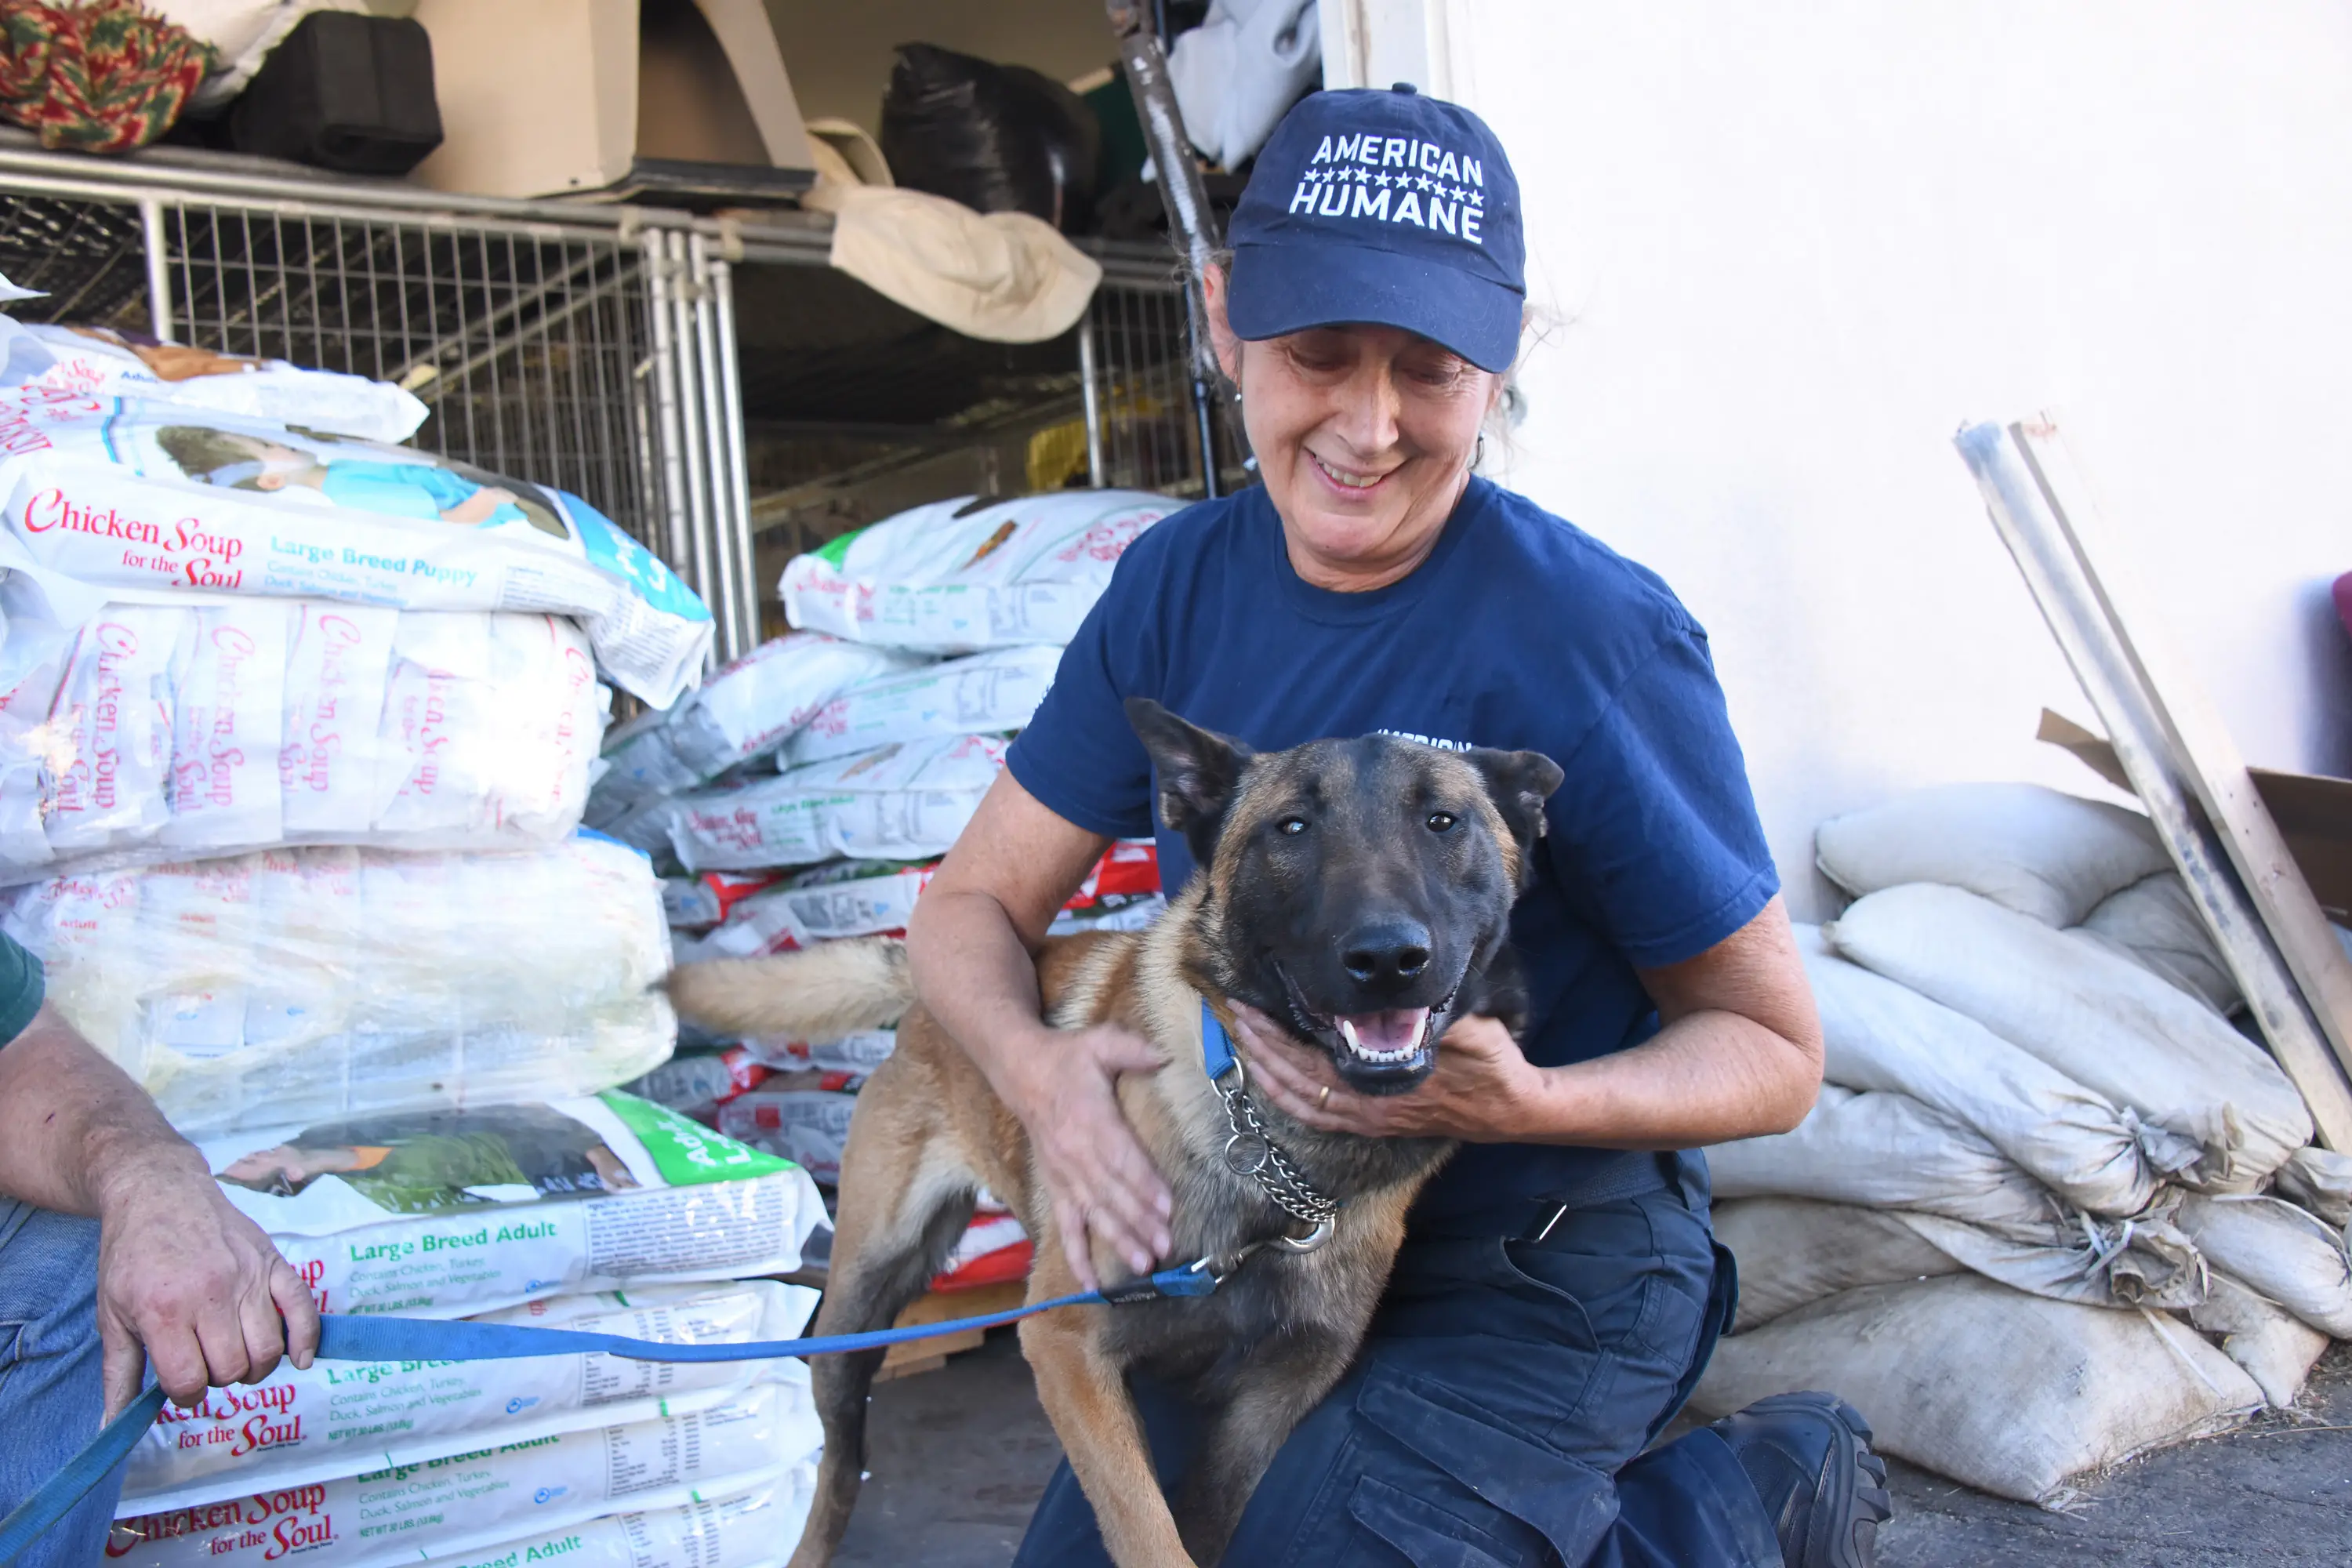 East Coast Animal Rescue Saving Lives and Making a Difference